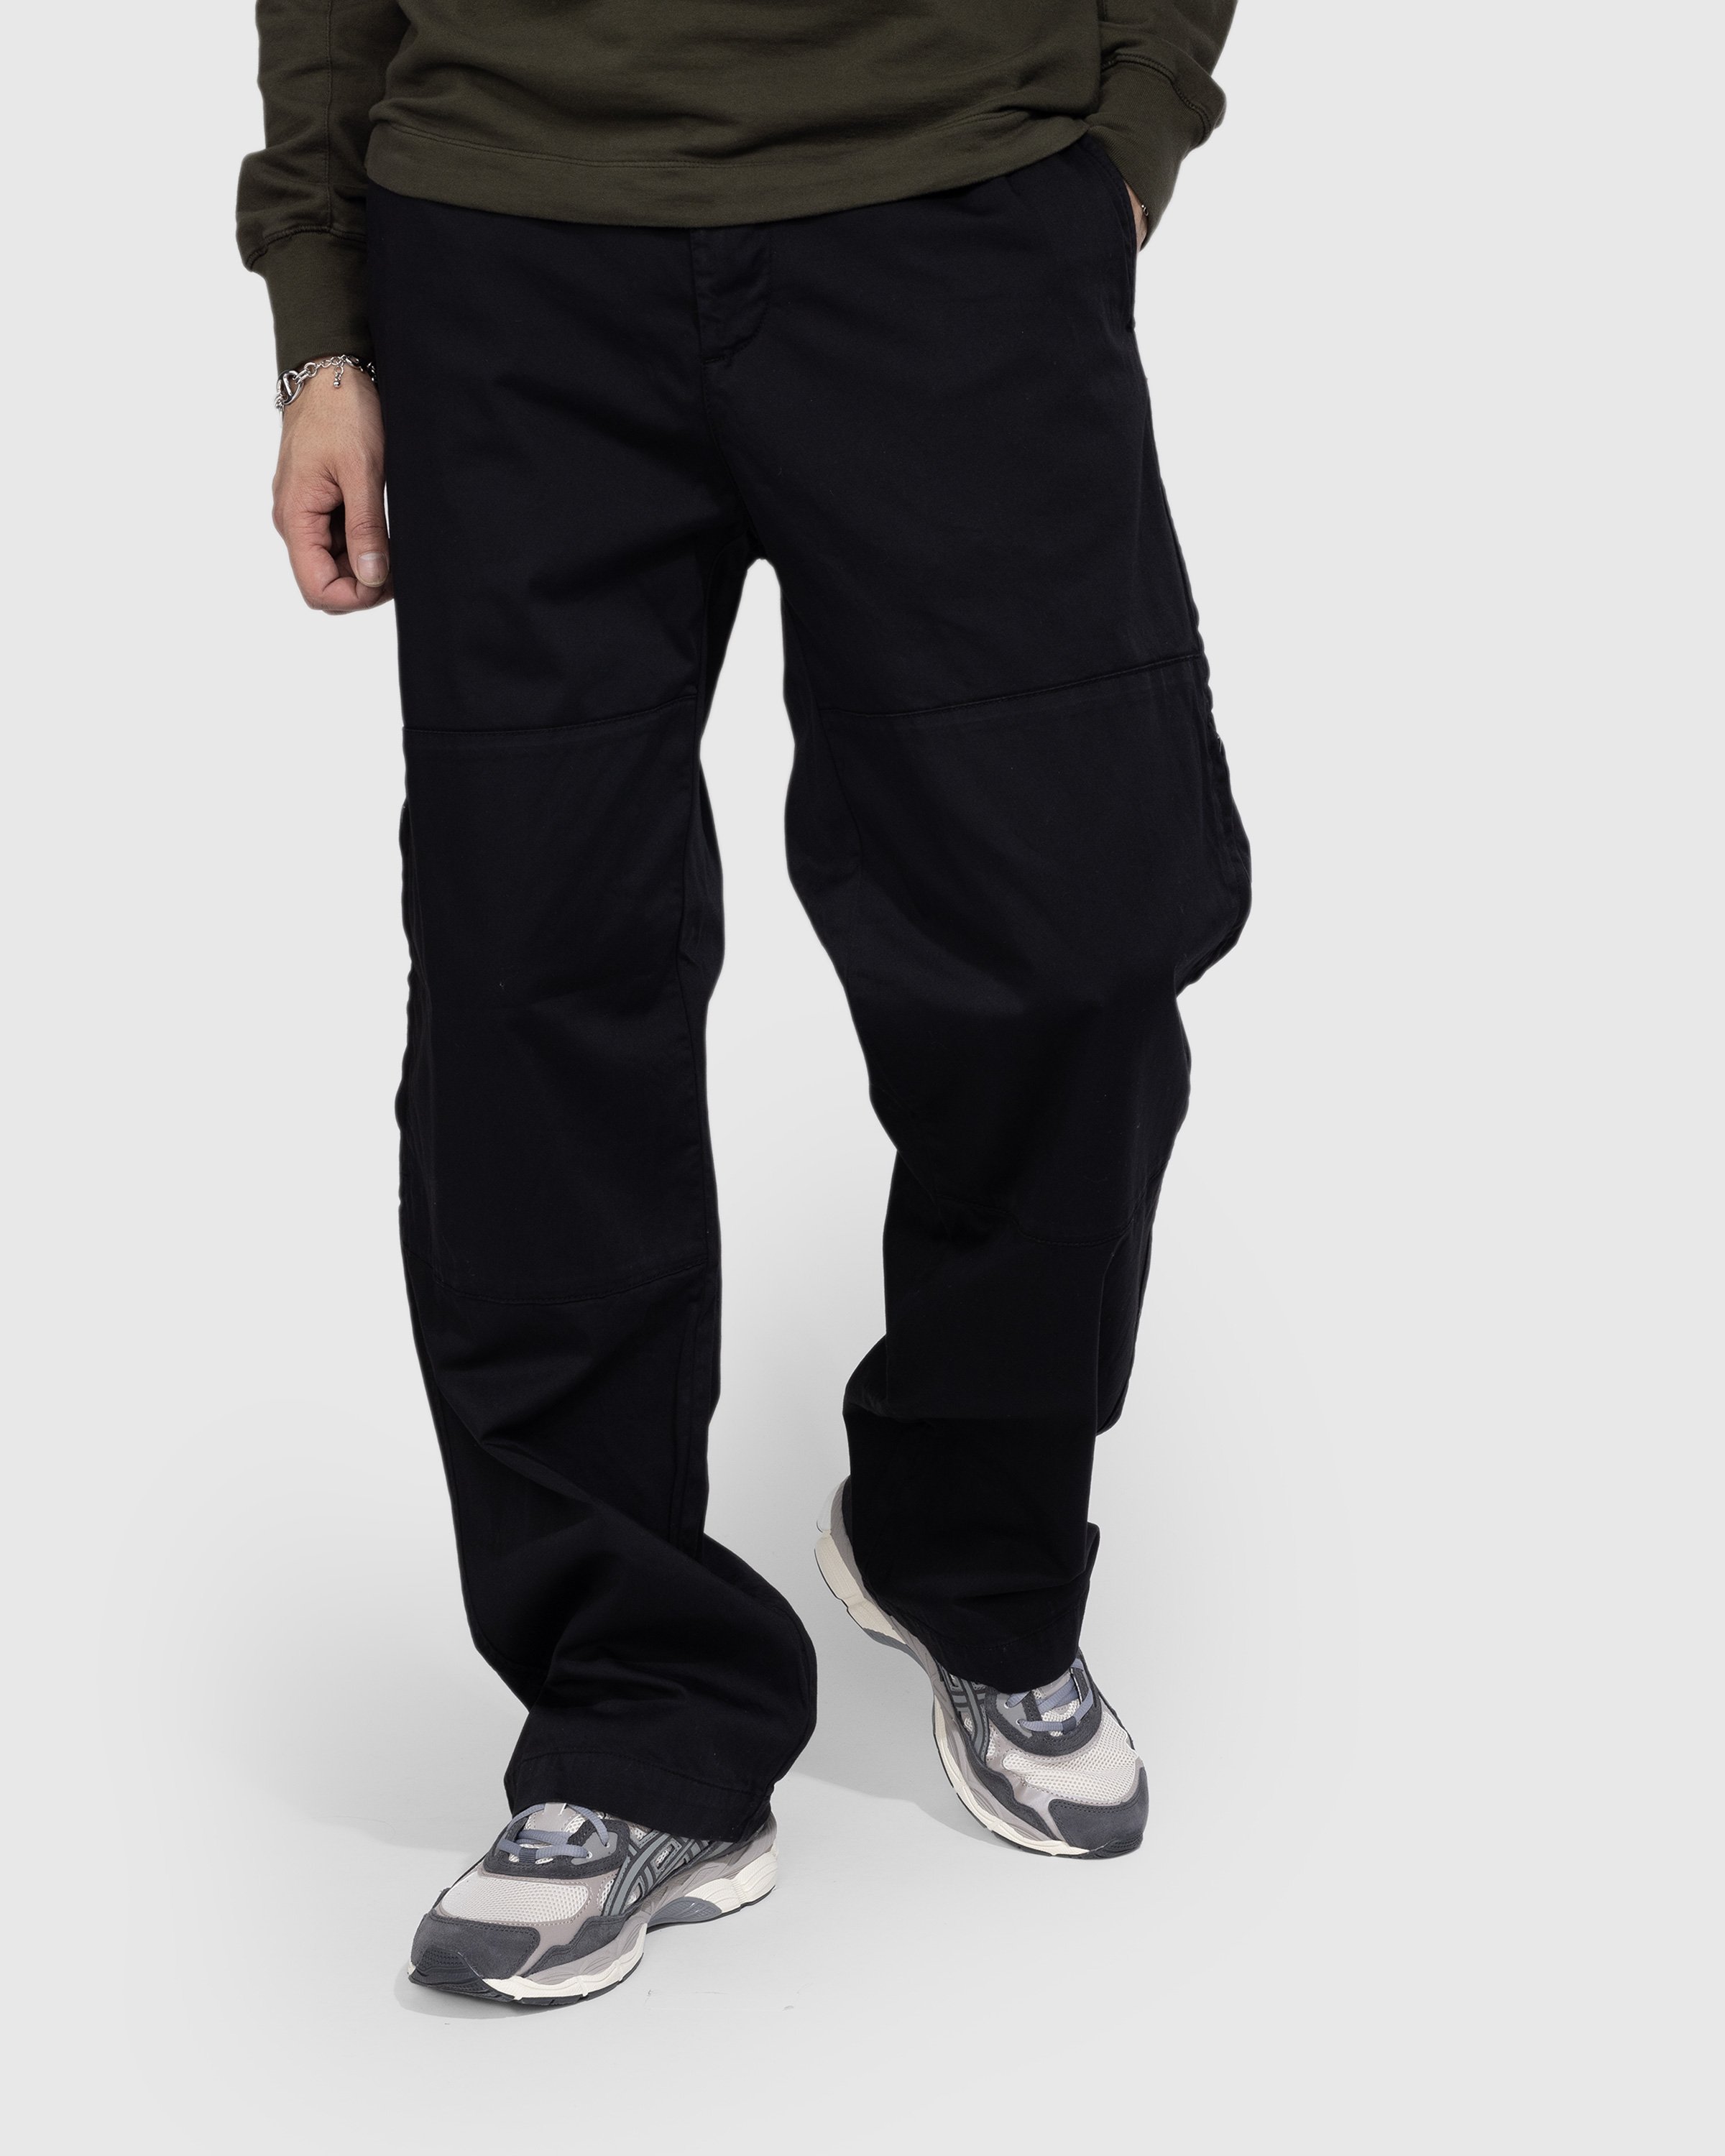 C.P. Company - Stretch Sateen Loose Fit Pants Black - Clothing - Black - Image 2